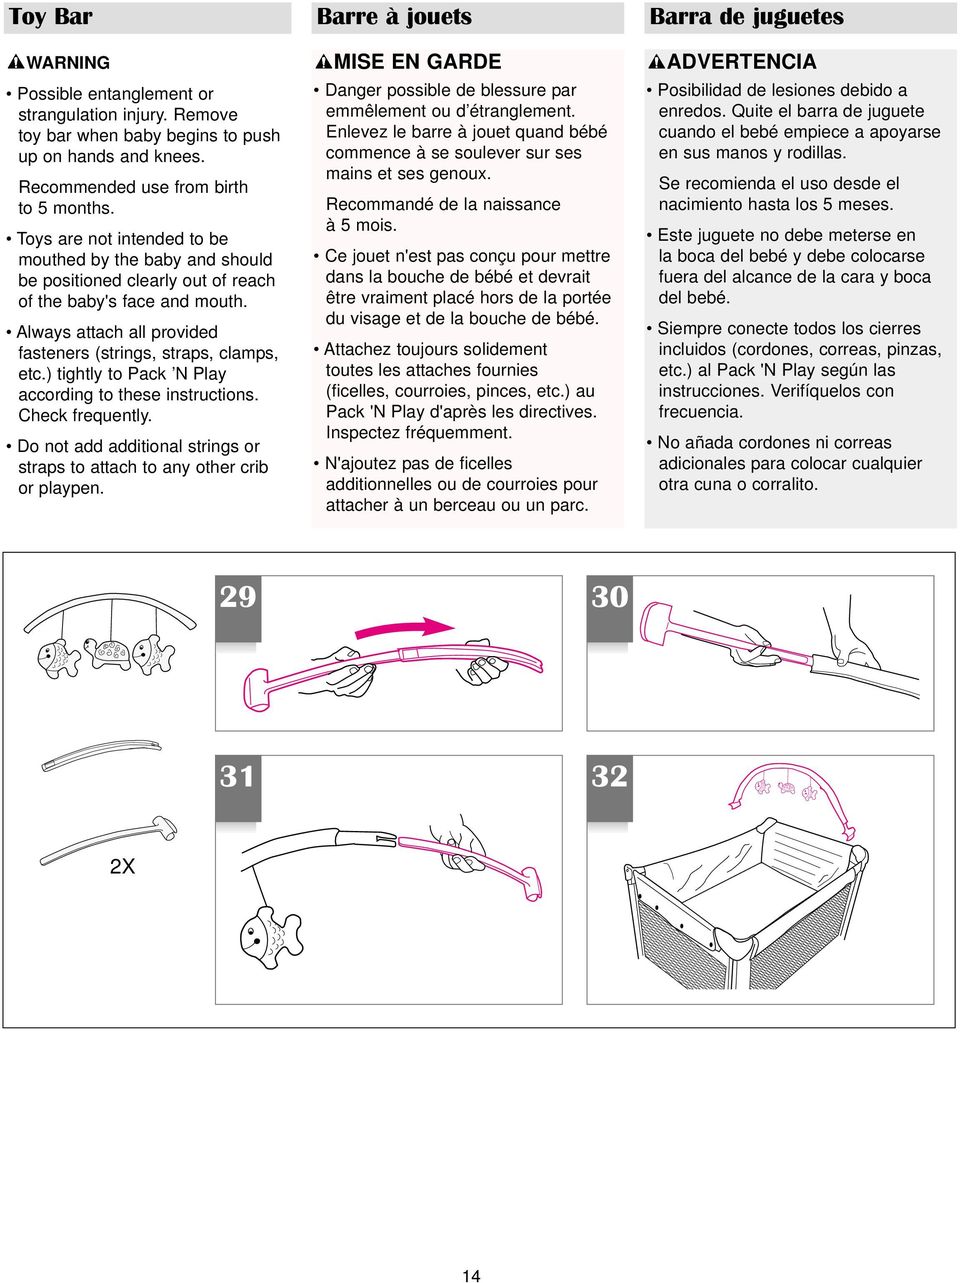 ) tightly to Pack N Play according to these instructions. Check frequently. Do not add additional strings or straps to attach to any other crib or playpen.